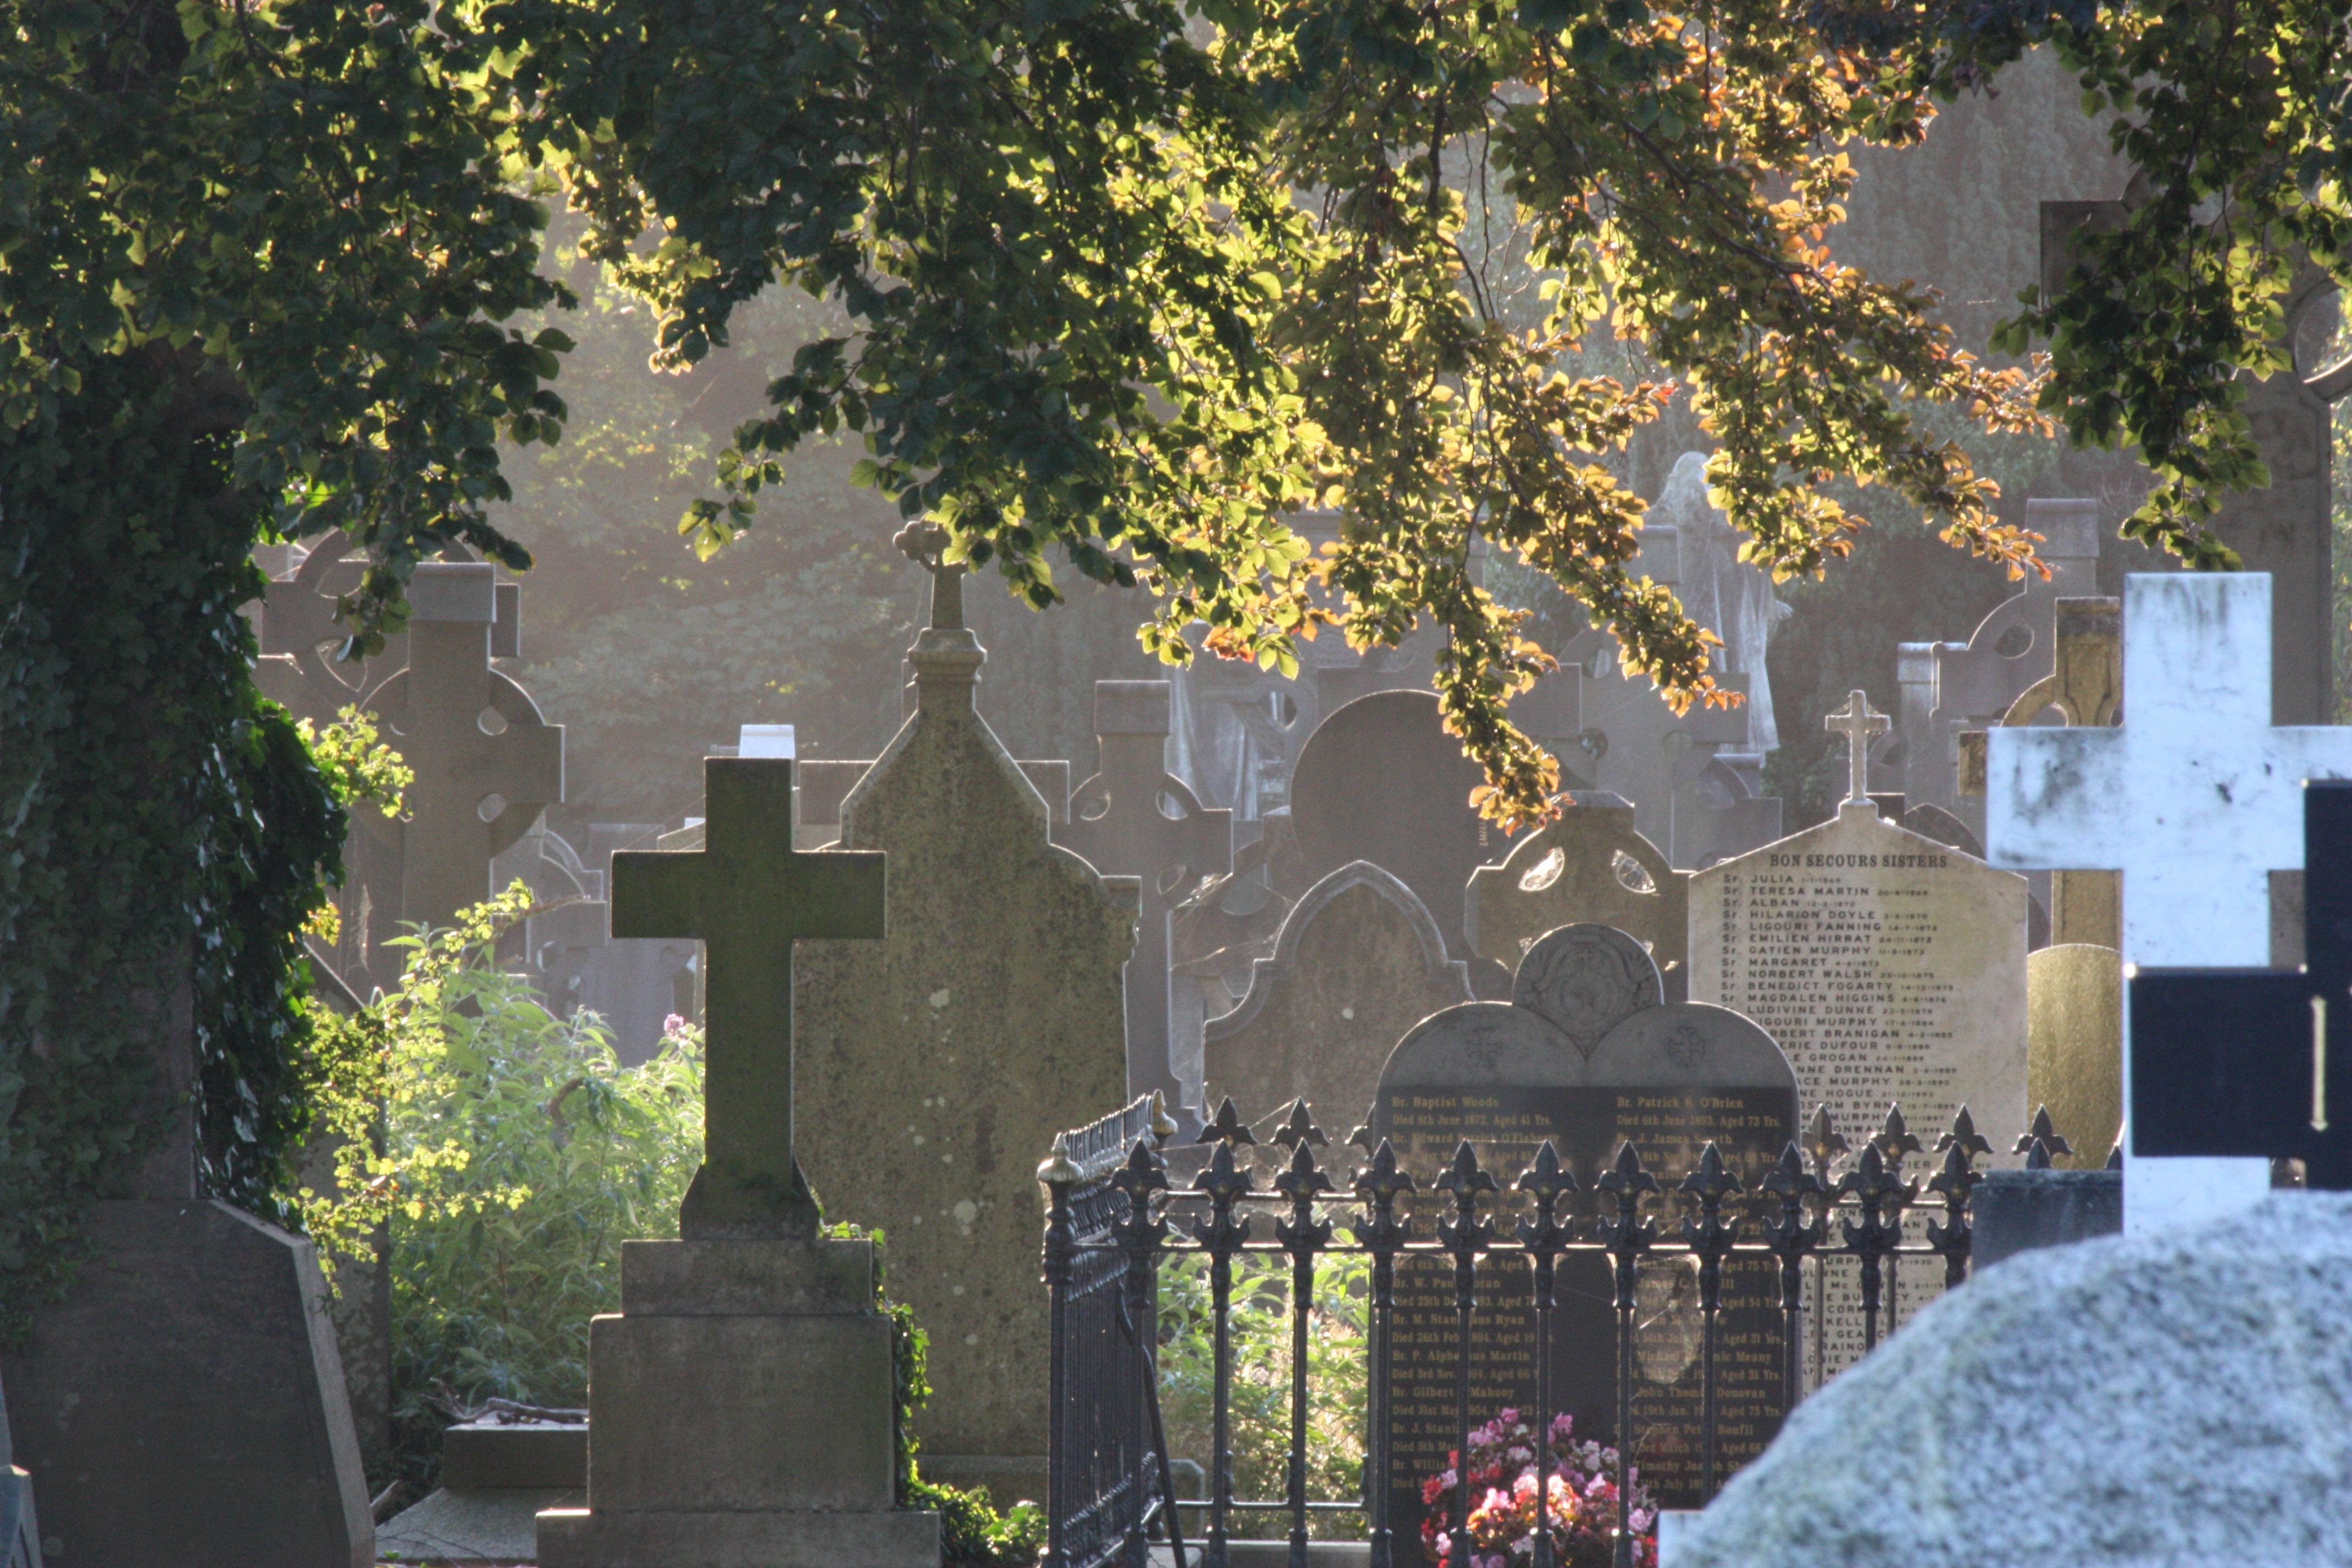 Summer's evening at Glasnevin.